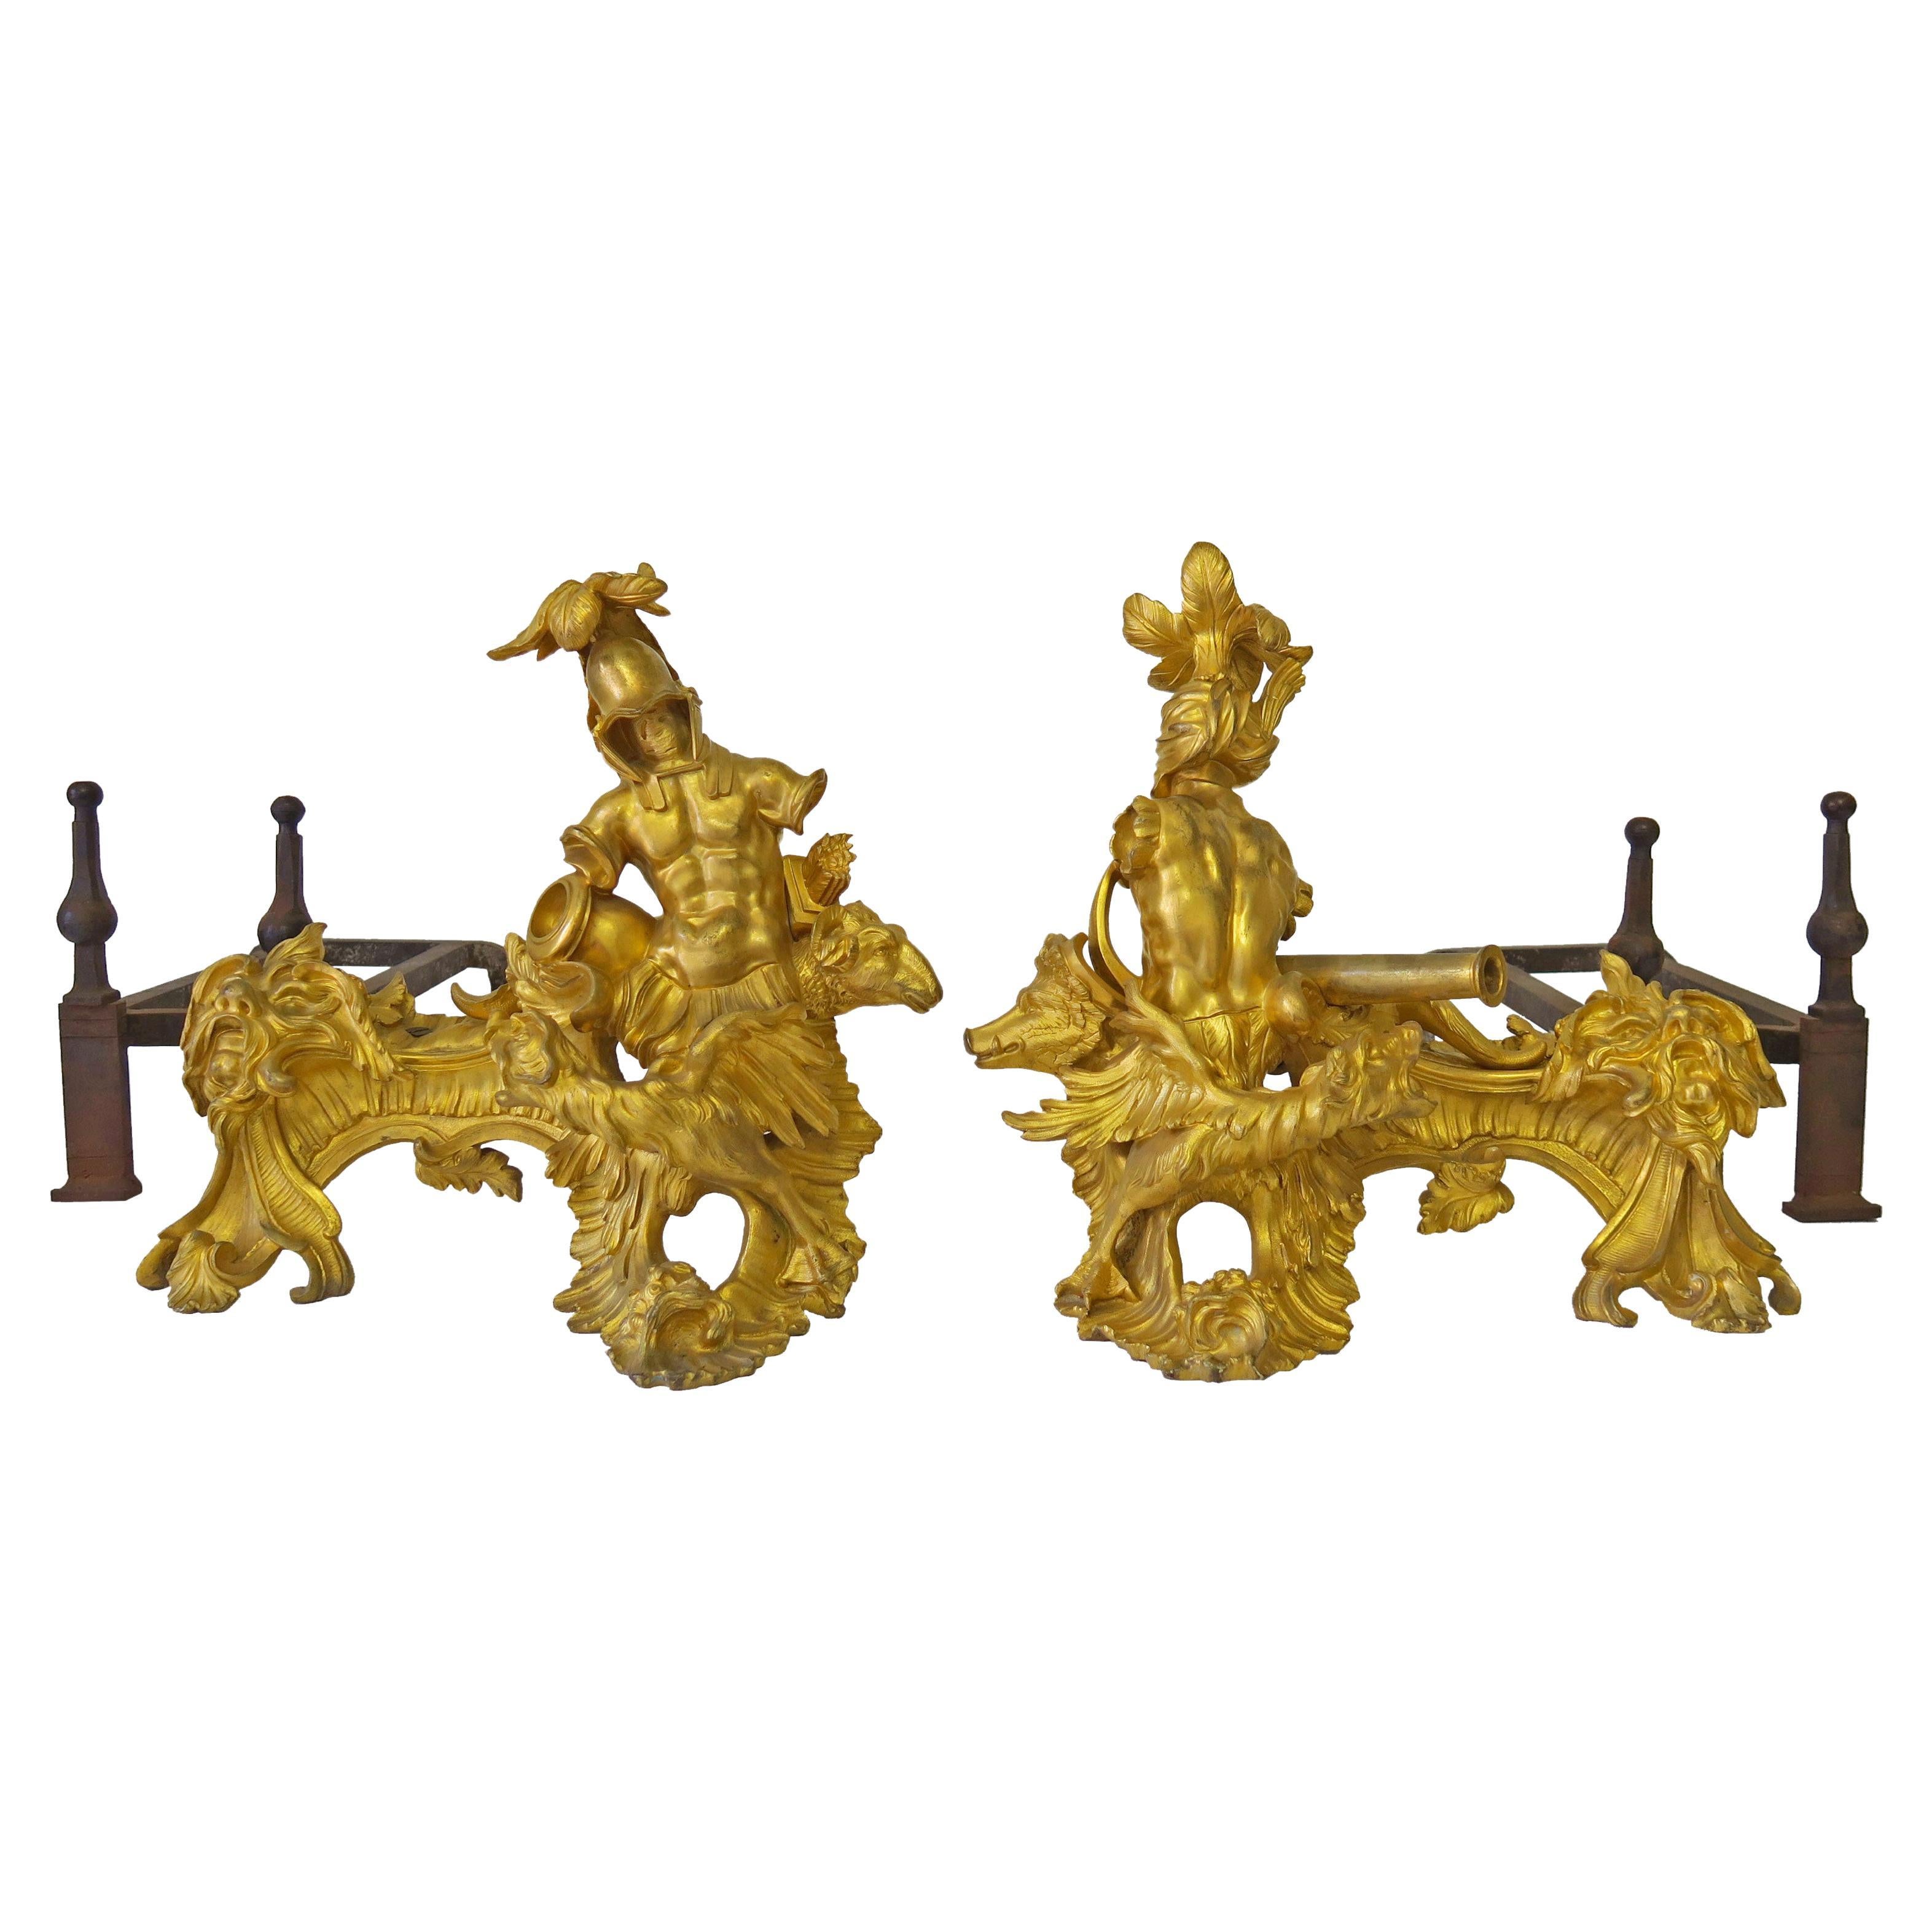 Pair of Antique French Louis XV Ormolu Chenets, France, Circa 1790